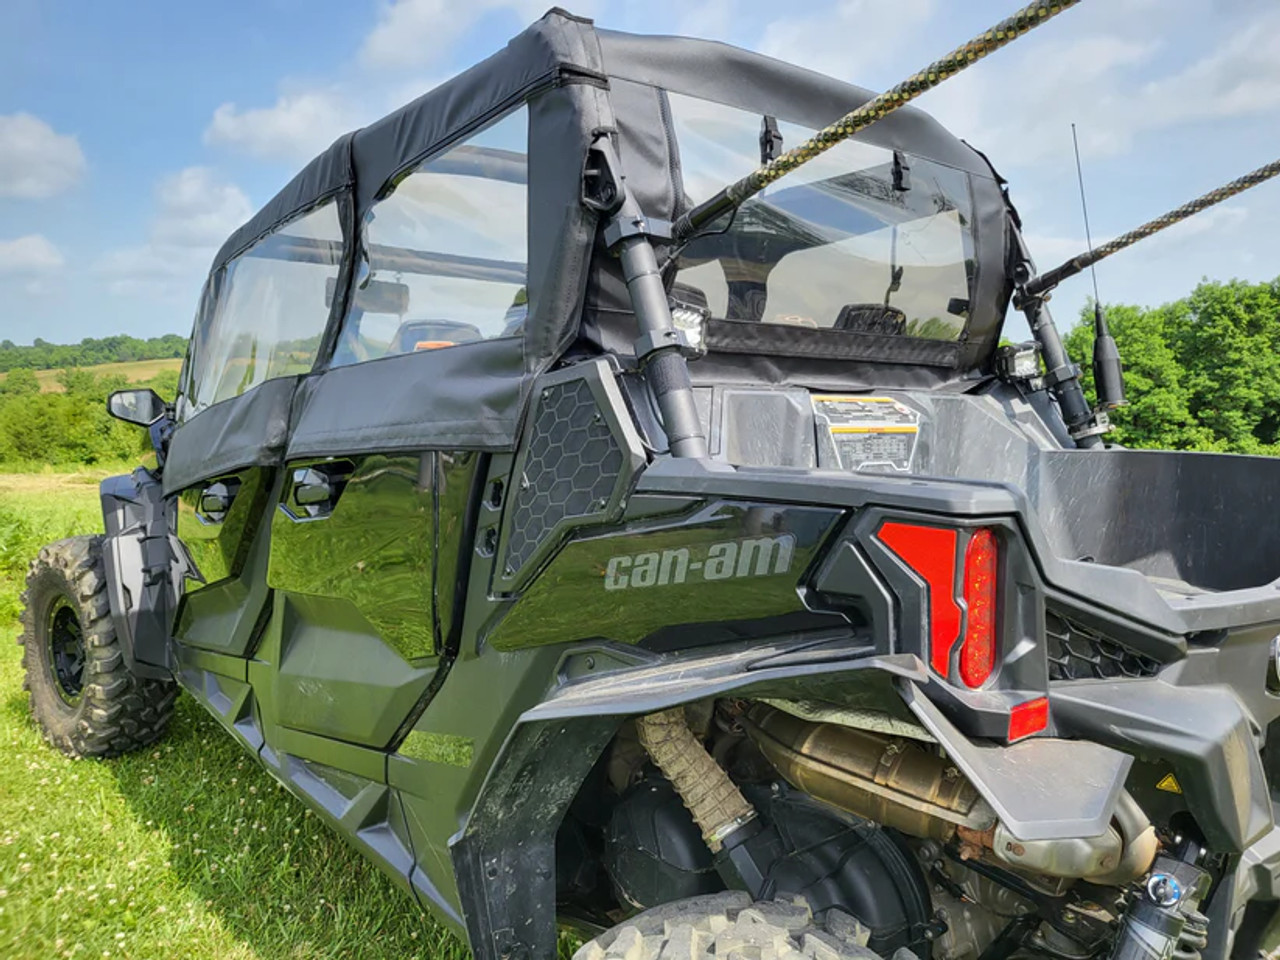 3 Star side x side Can-Am Maverick Sport Max upper doors and rear window rear angle view